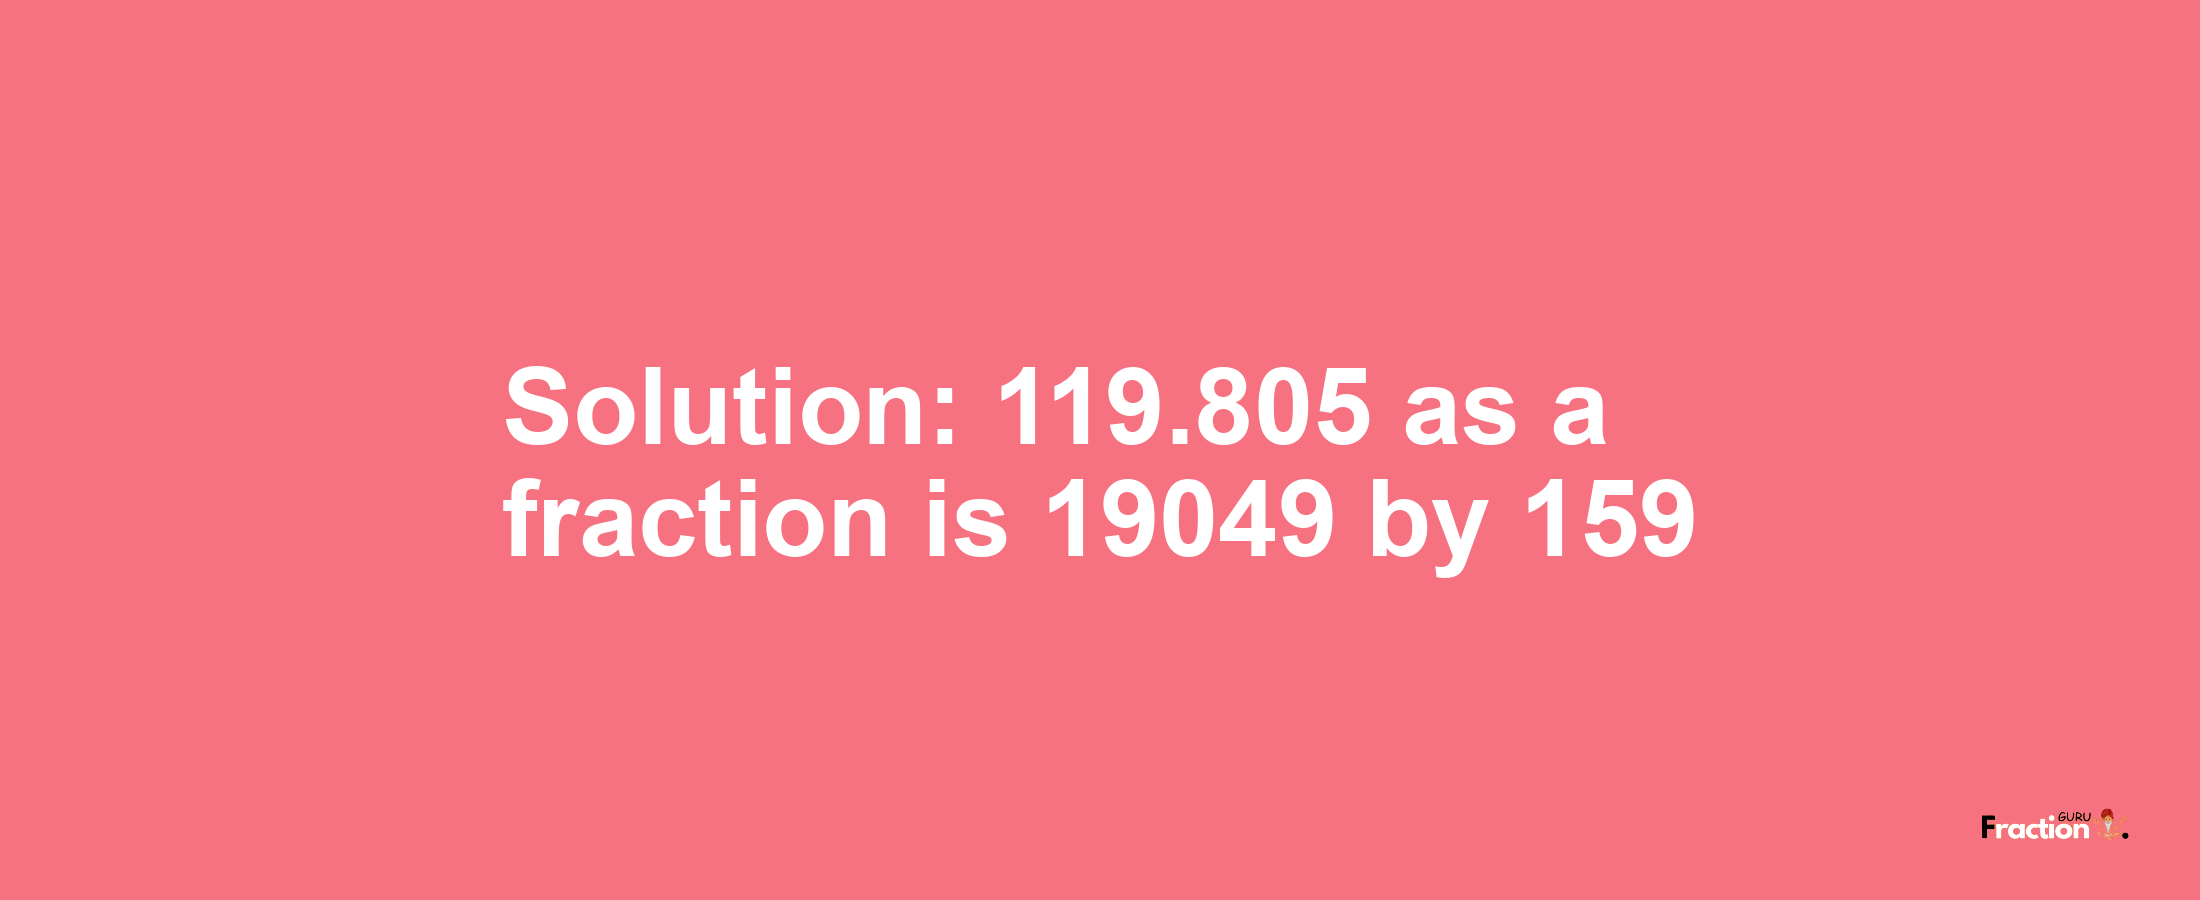 Solution:119.805 as a fraction is 19049/159